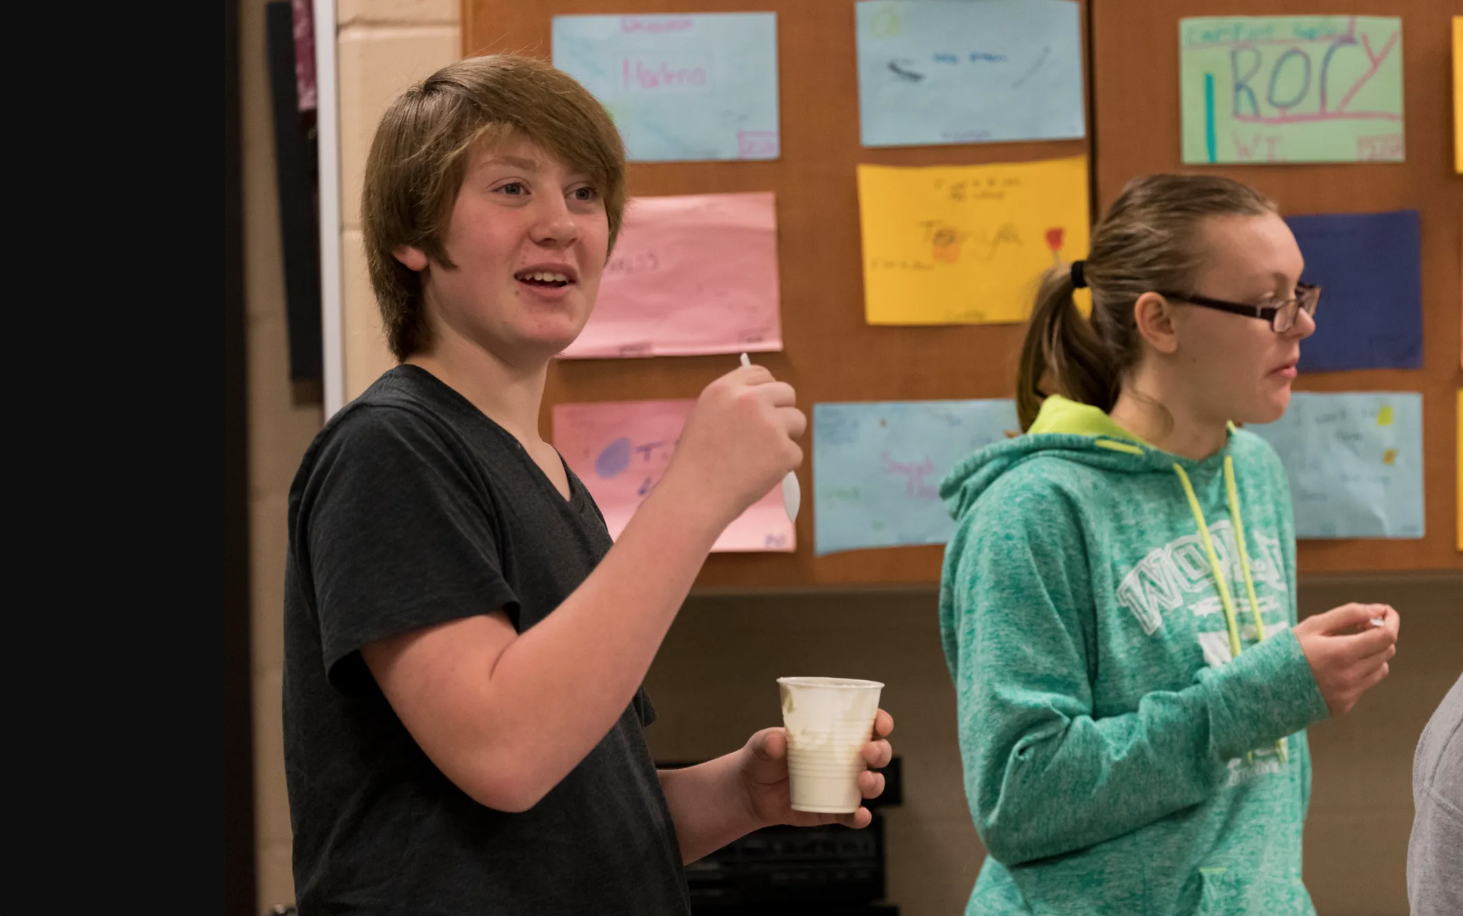 Thomas Cummings, left, takes part in a taste test of dairy and non-dairy products during a food science class at Cashton Middle/High School in Cashton. Image by Mark Hoffman/ Milwaukee Journal Sentinel. United States, 2020.